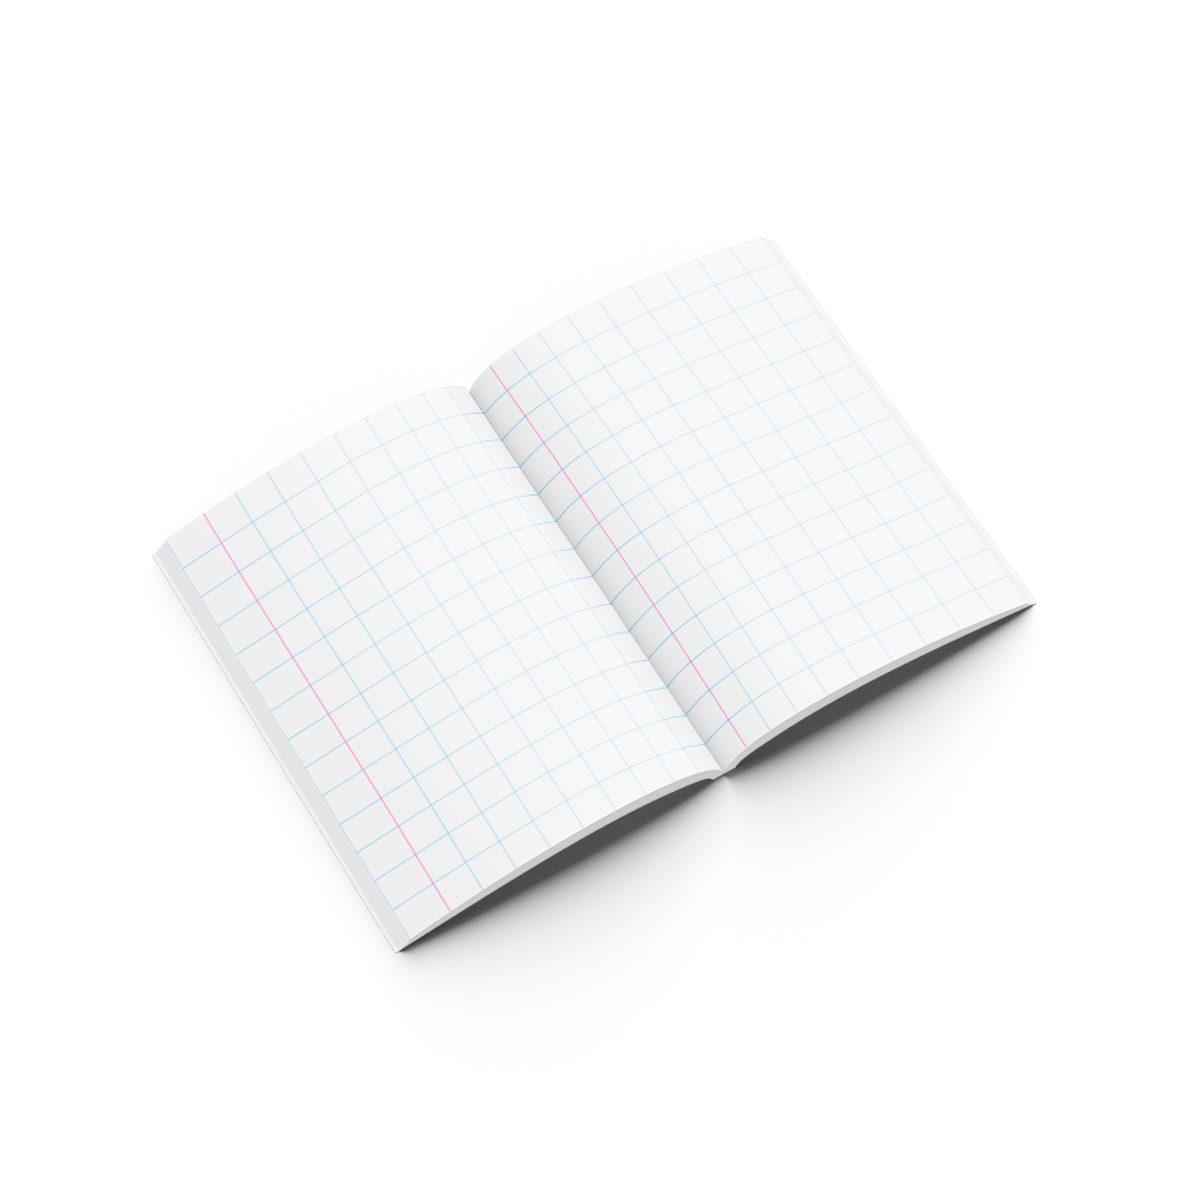 PSI Exercise Book 15mm Square 100 Pages 15M100